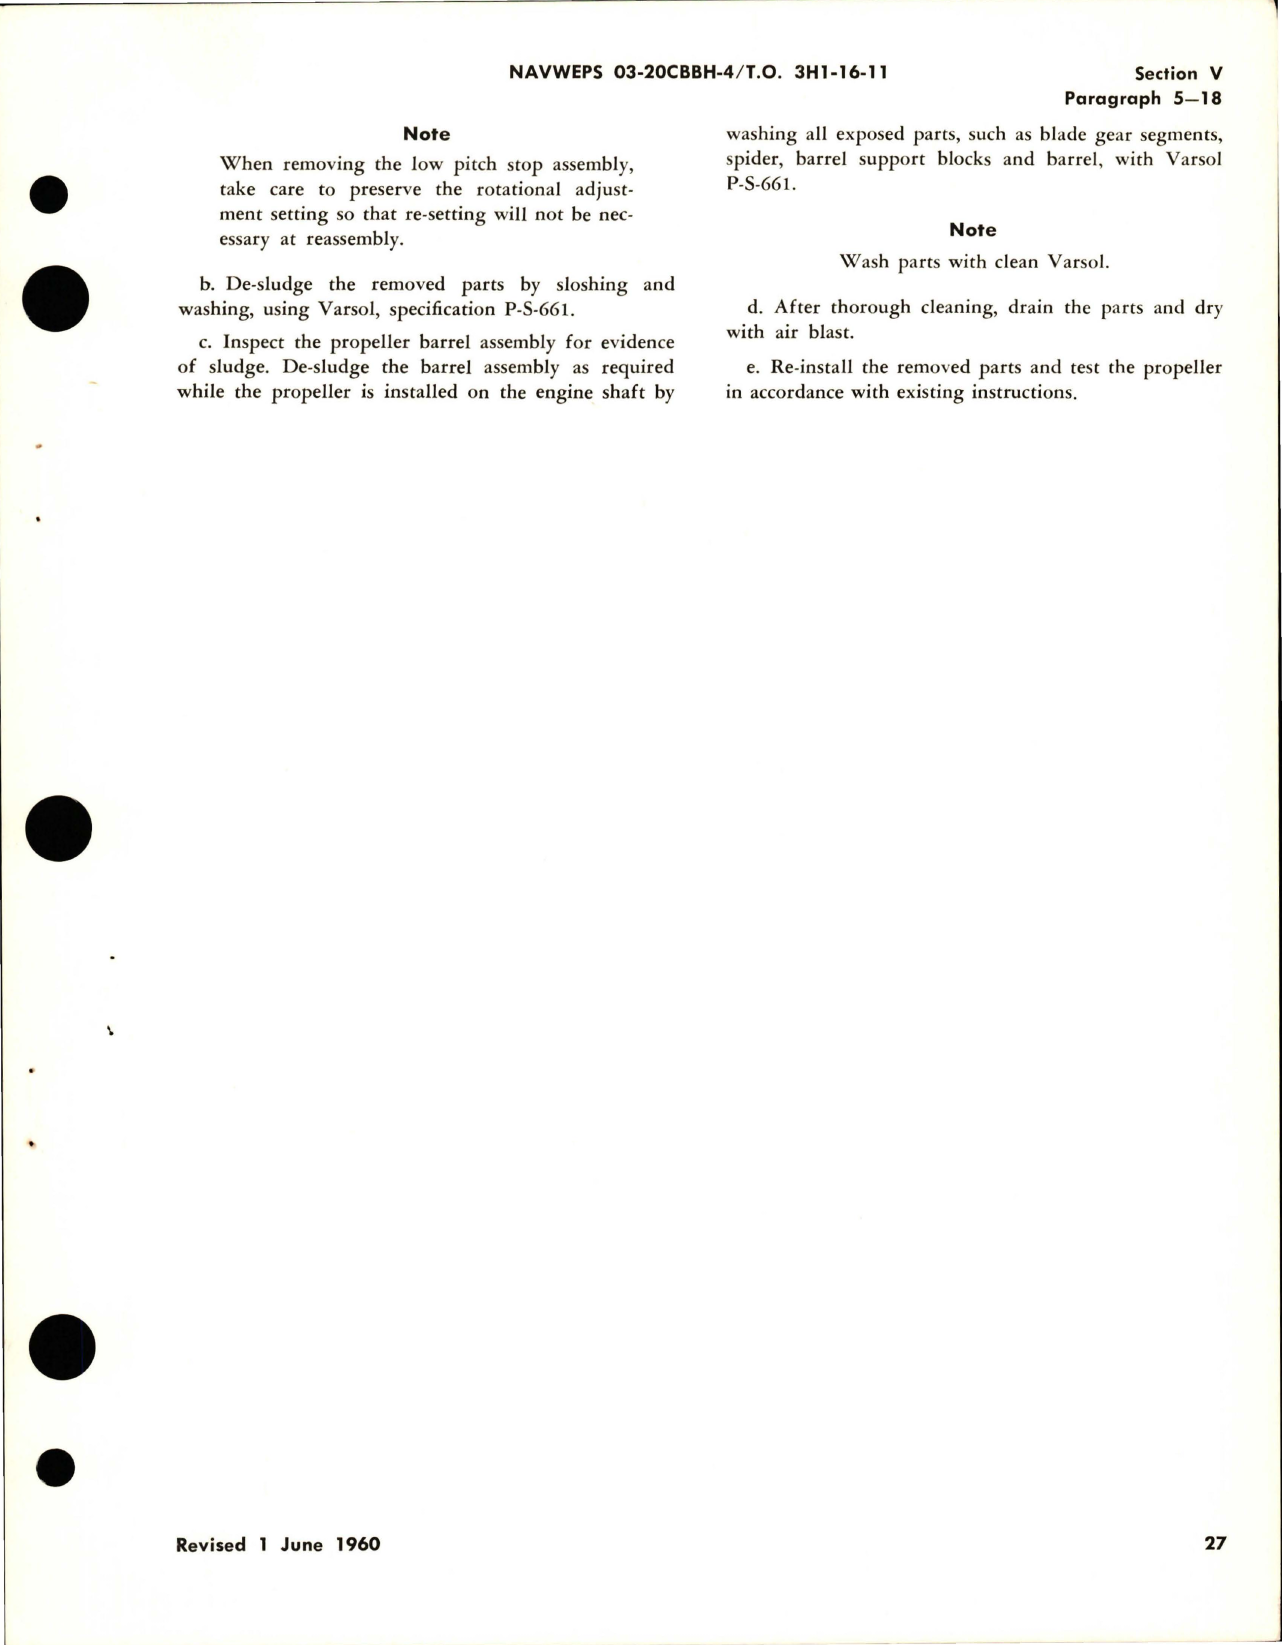 Sample page 7 from AirCorps Library document: Operation and Maintenance Instructions for Variable Pitch Propeller - Models 43H60-359, 43H60-383, and 43H60-395 